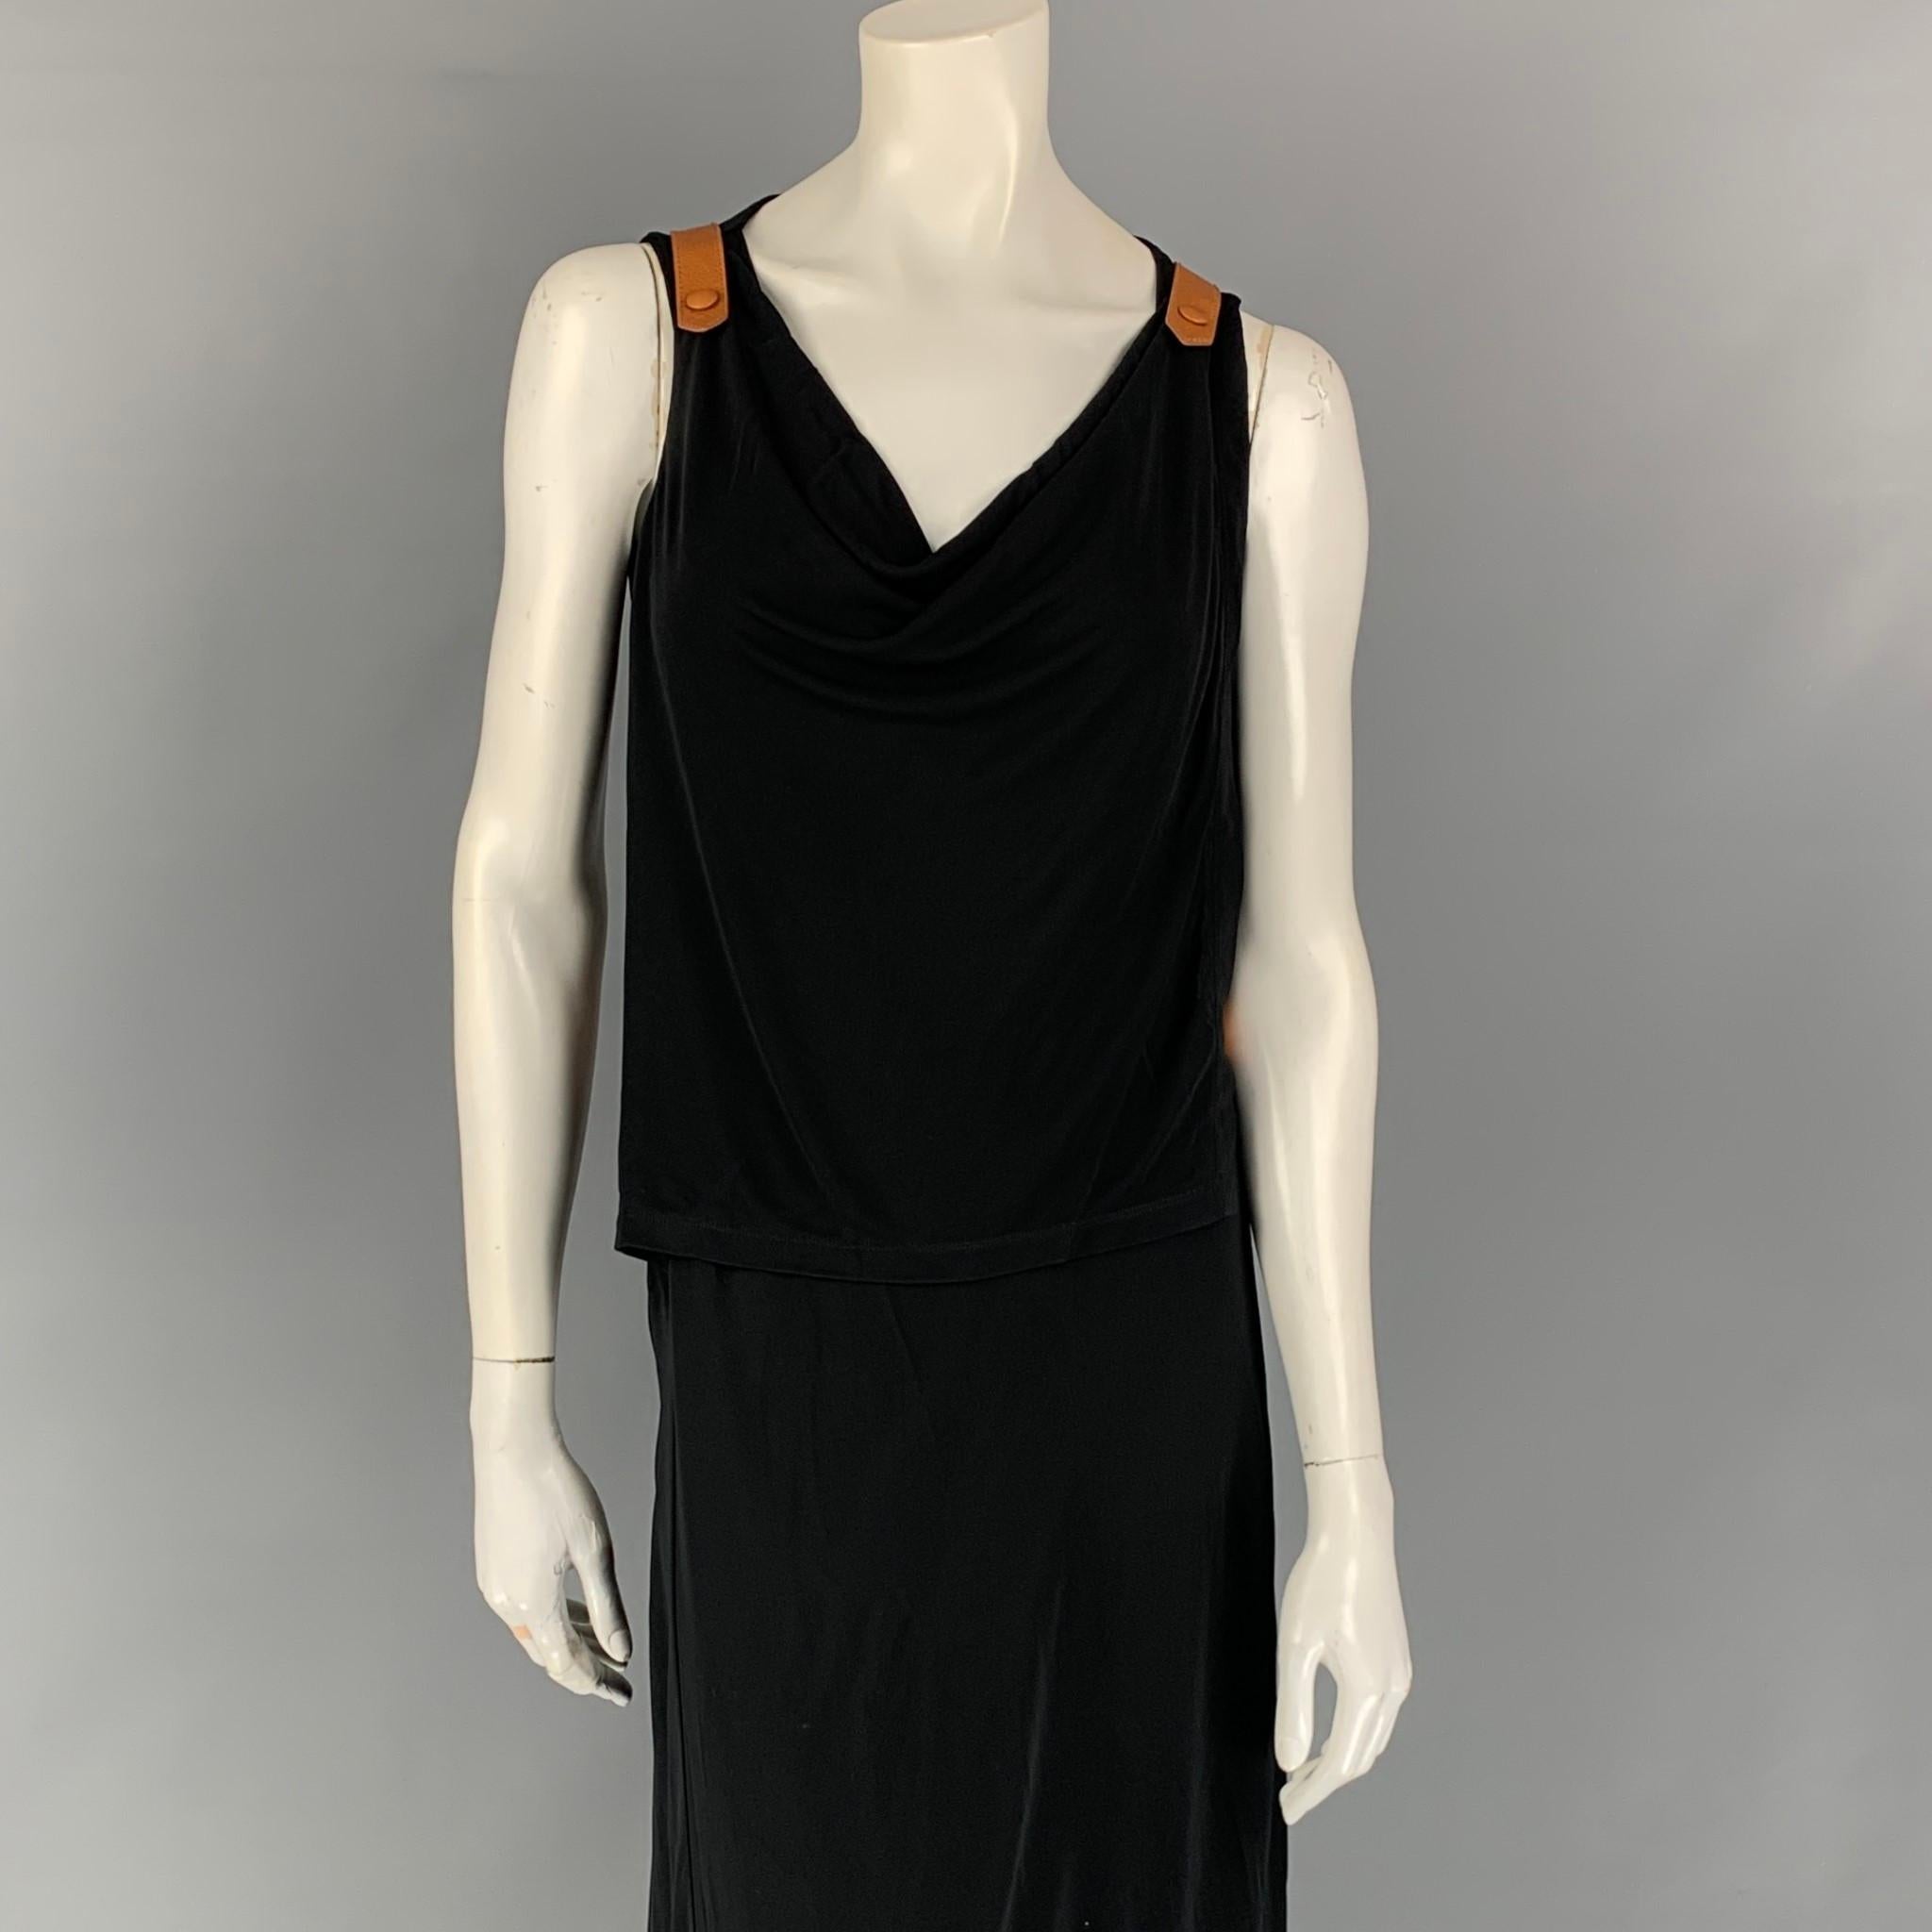 JEAN PAUL GAULTIER dress comes in a black rayon blend with tan leather strap details featuring a wrap style, sleeveless, and a front slit. 

Very Good Pre-Owned Condition.
Marked: I 40 / D 36 / F 36 / GB 8 / USA 6

Measurements:

Bust: 30 in.
Waist: